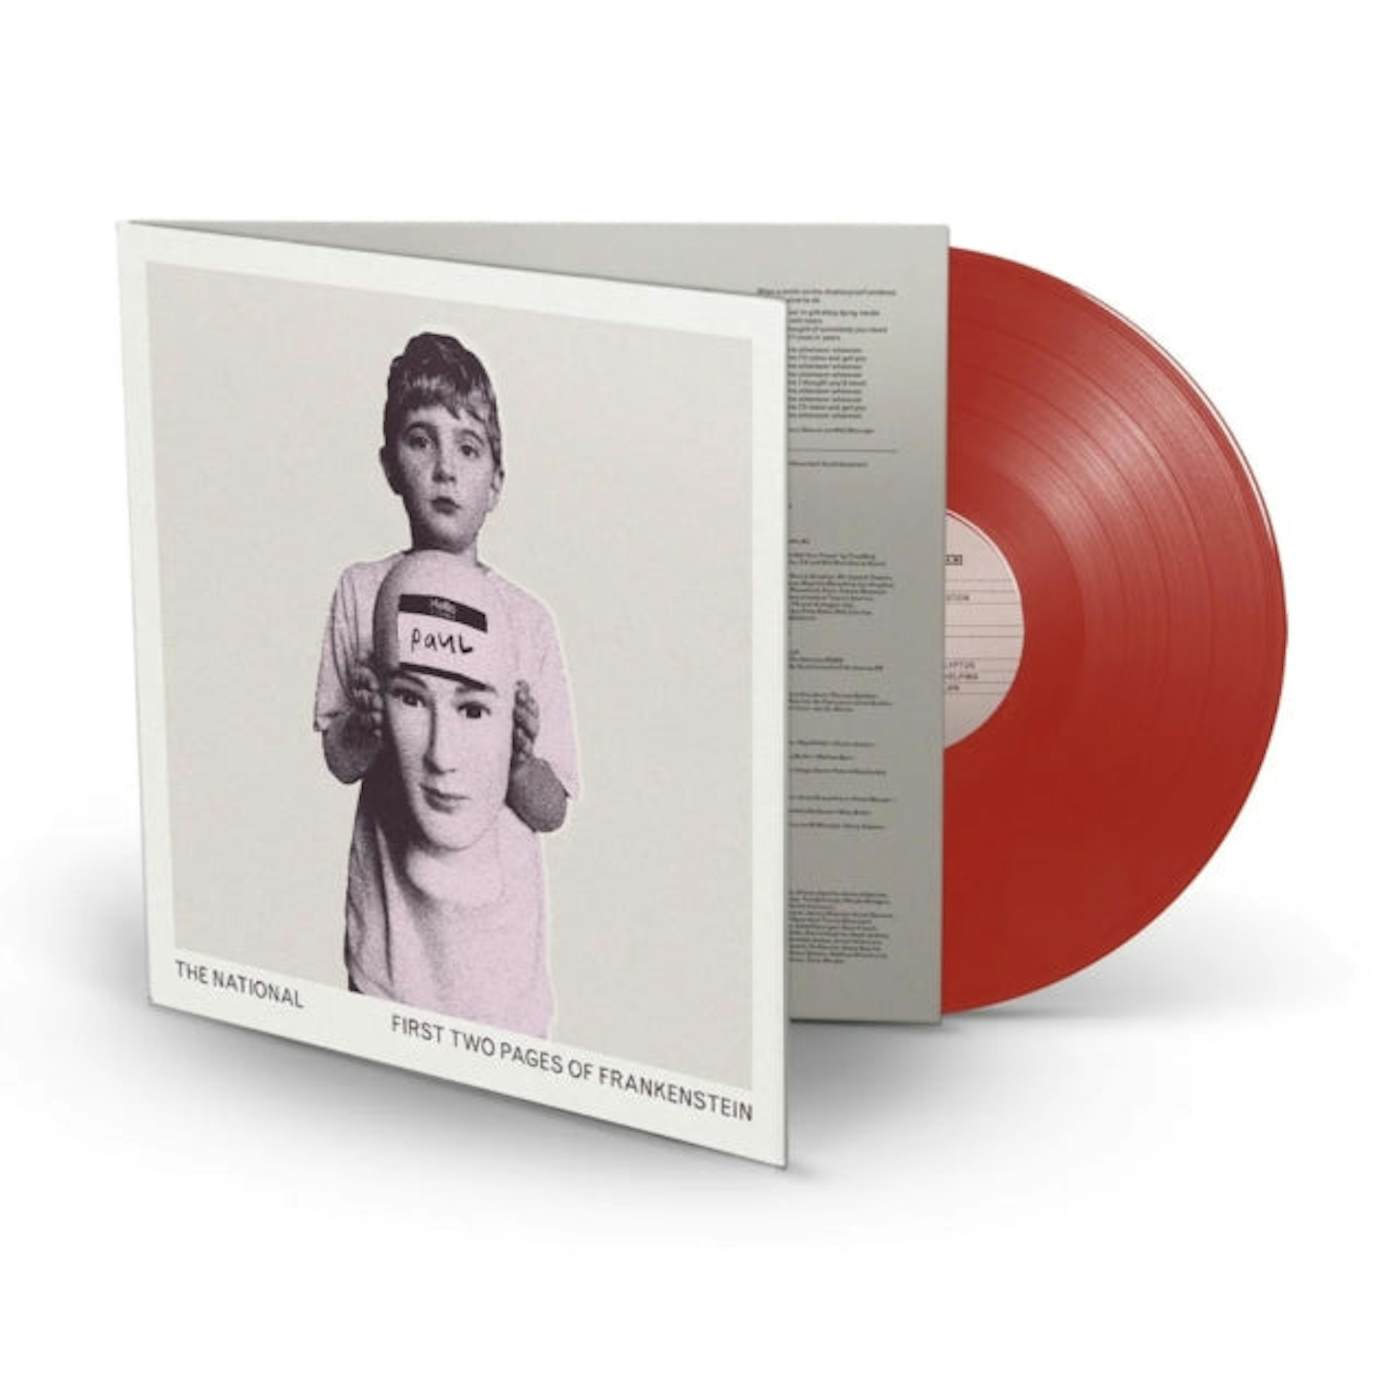 The National LP Vinyl Record - First Two Pages Of Frankenstein (Red Vinyl) (Indies)